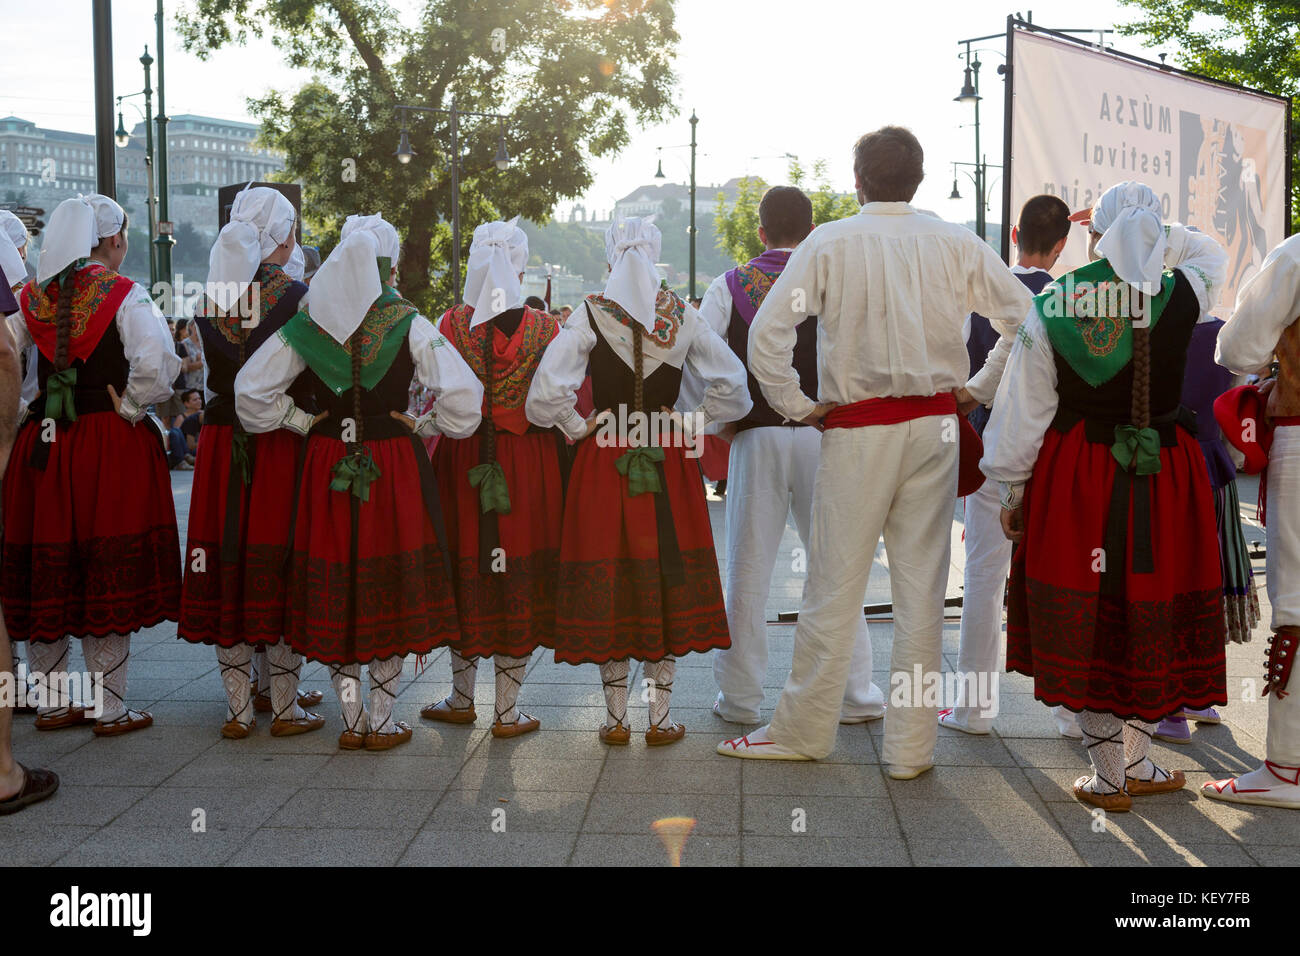 Tourists watch as performers do a traditional Hungarian dance dress in traditional costume. Stock Photo